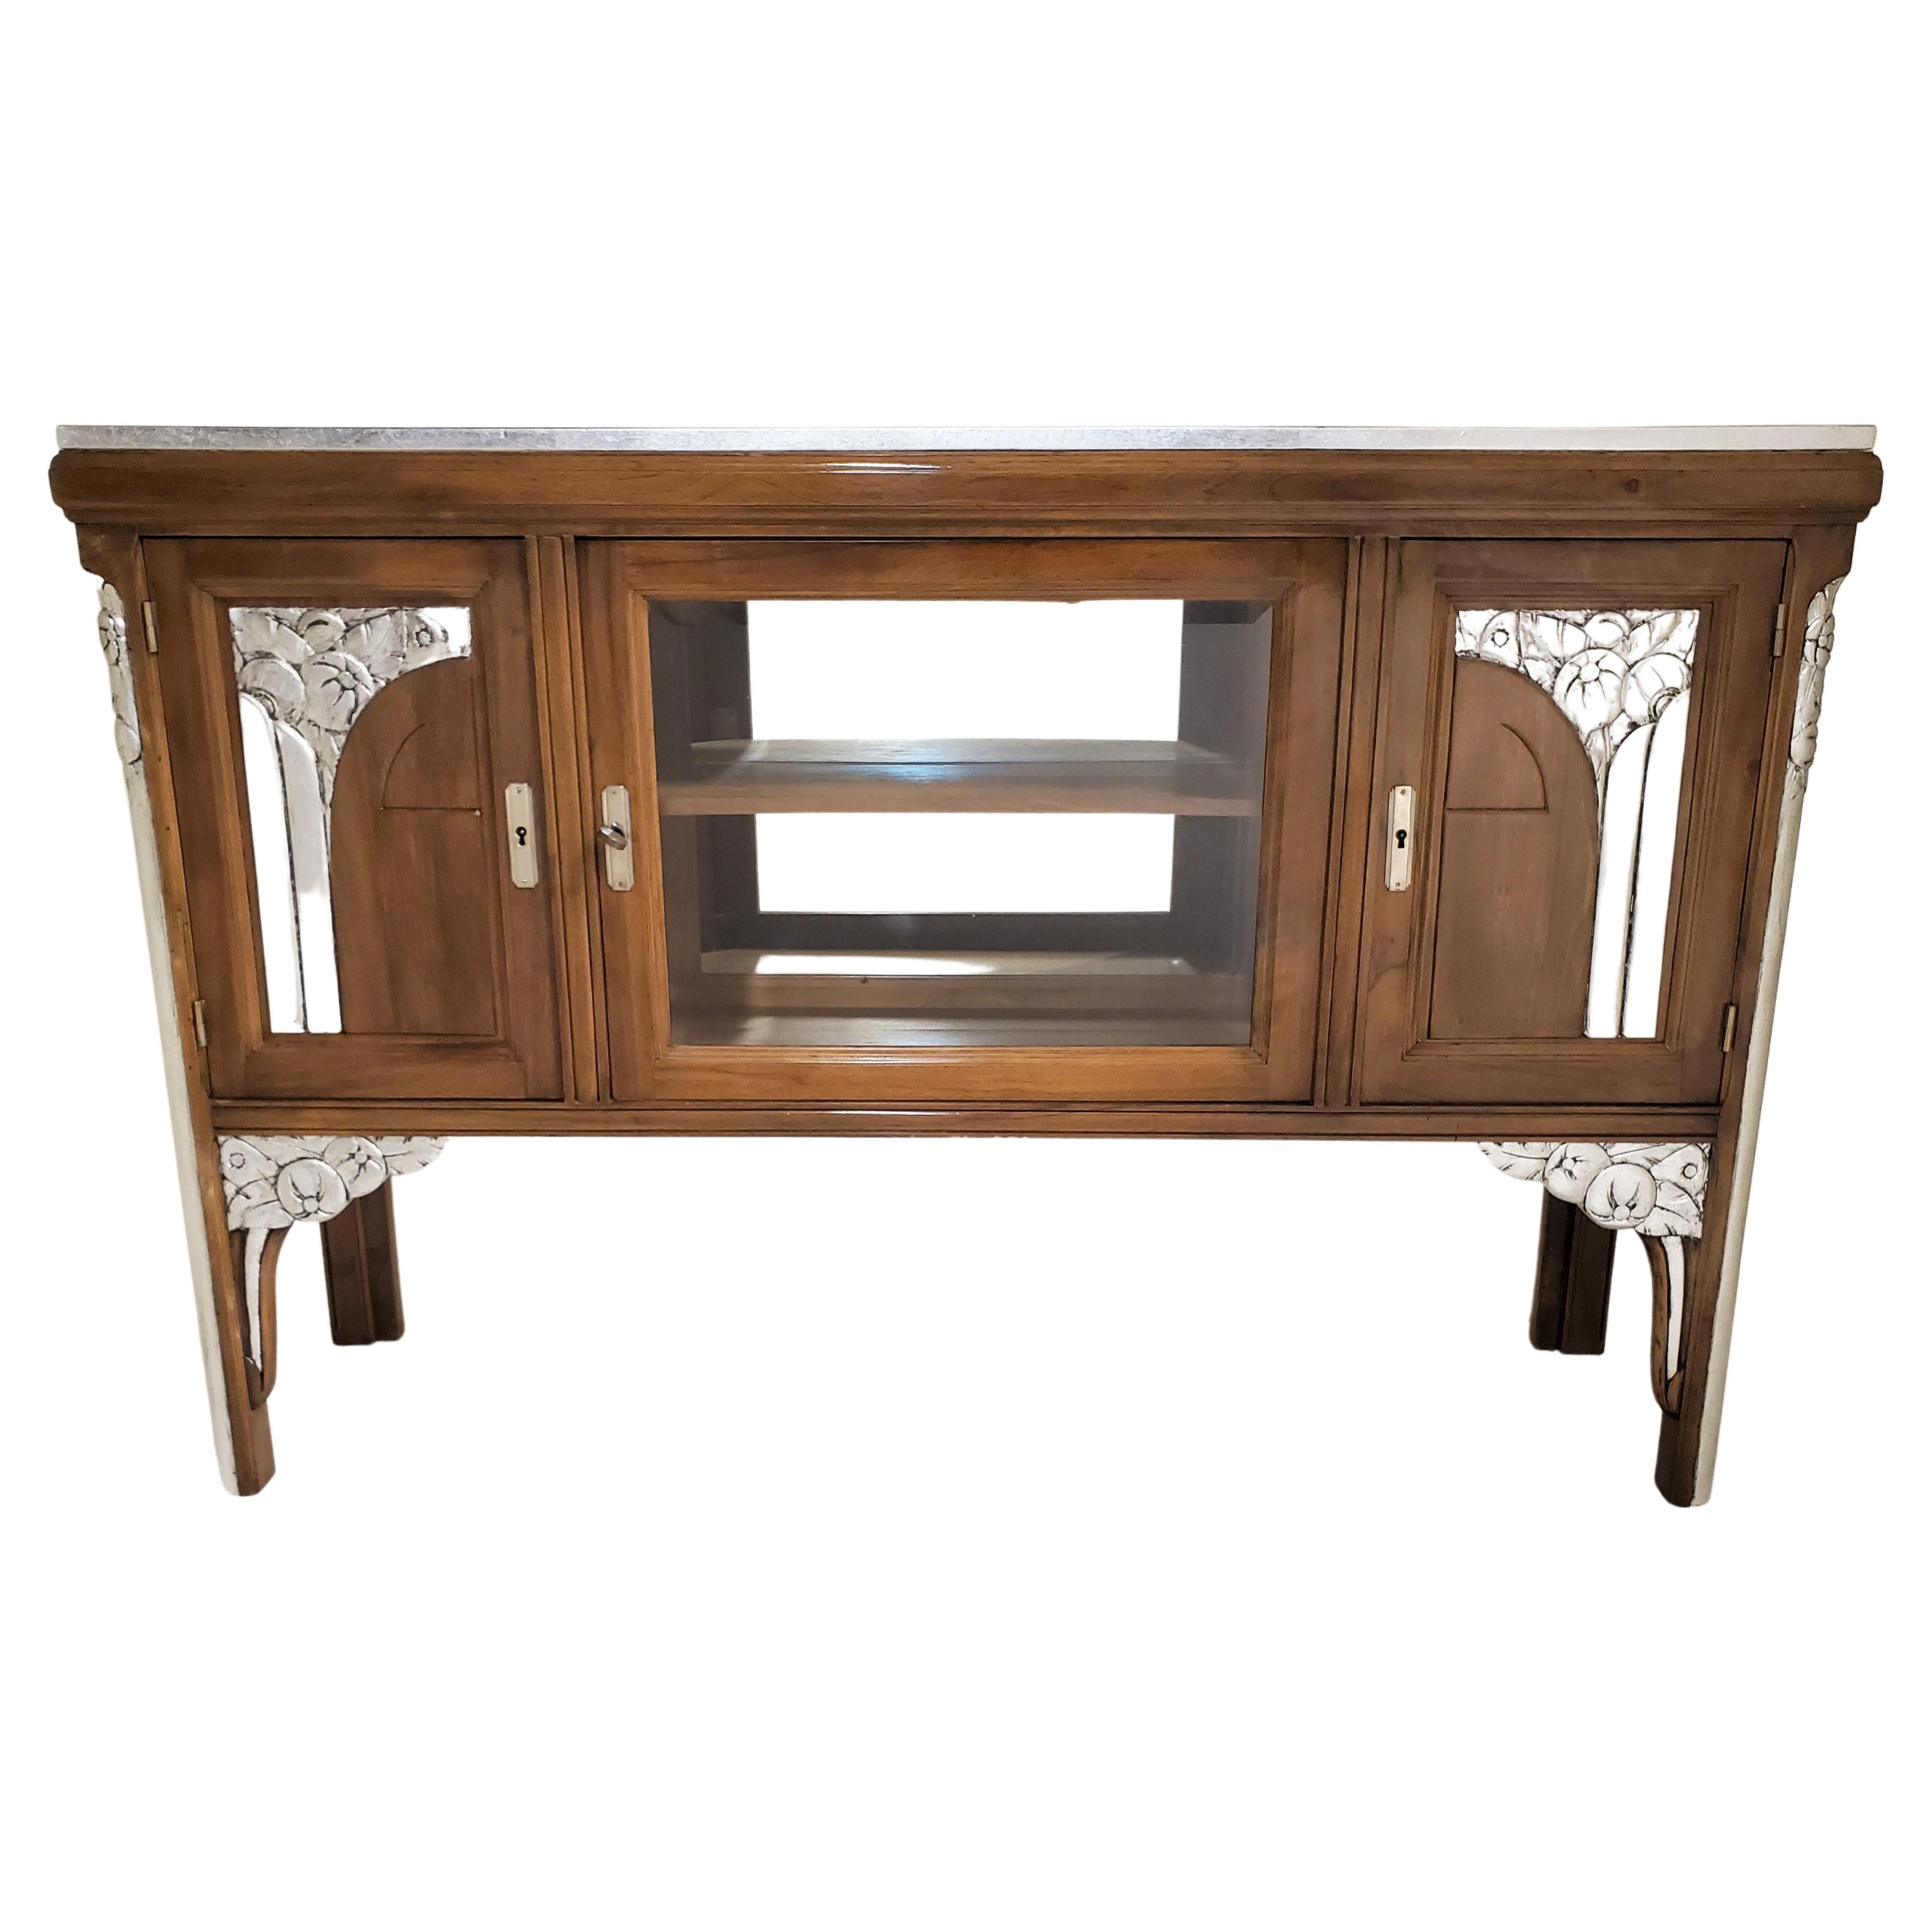 A French Art Deco three door walnut cabinet with hand carved metal leaf detail of geometric and stylized floral design. The walnut wood in a rich, mellow color adds warmth to the piece.
The center of the cabinet houses a mirrored backed glass